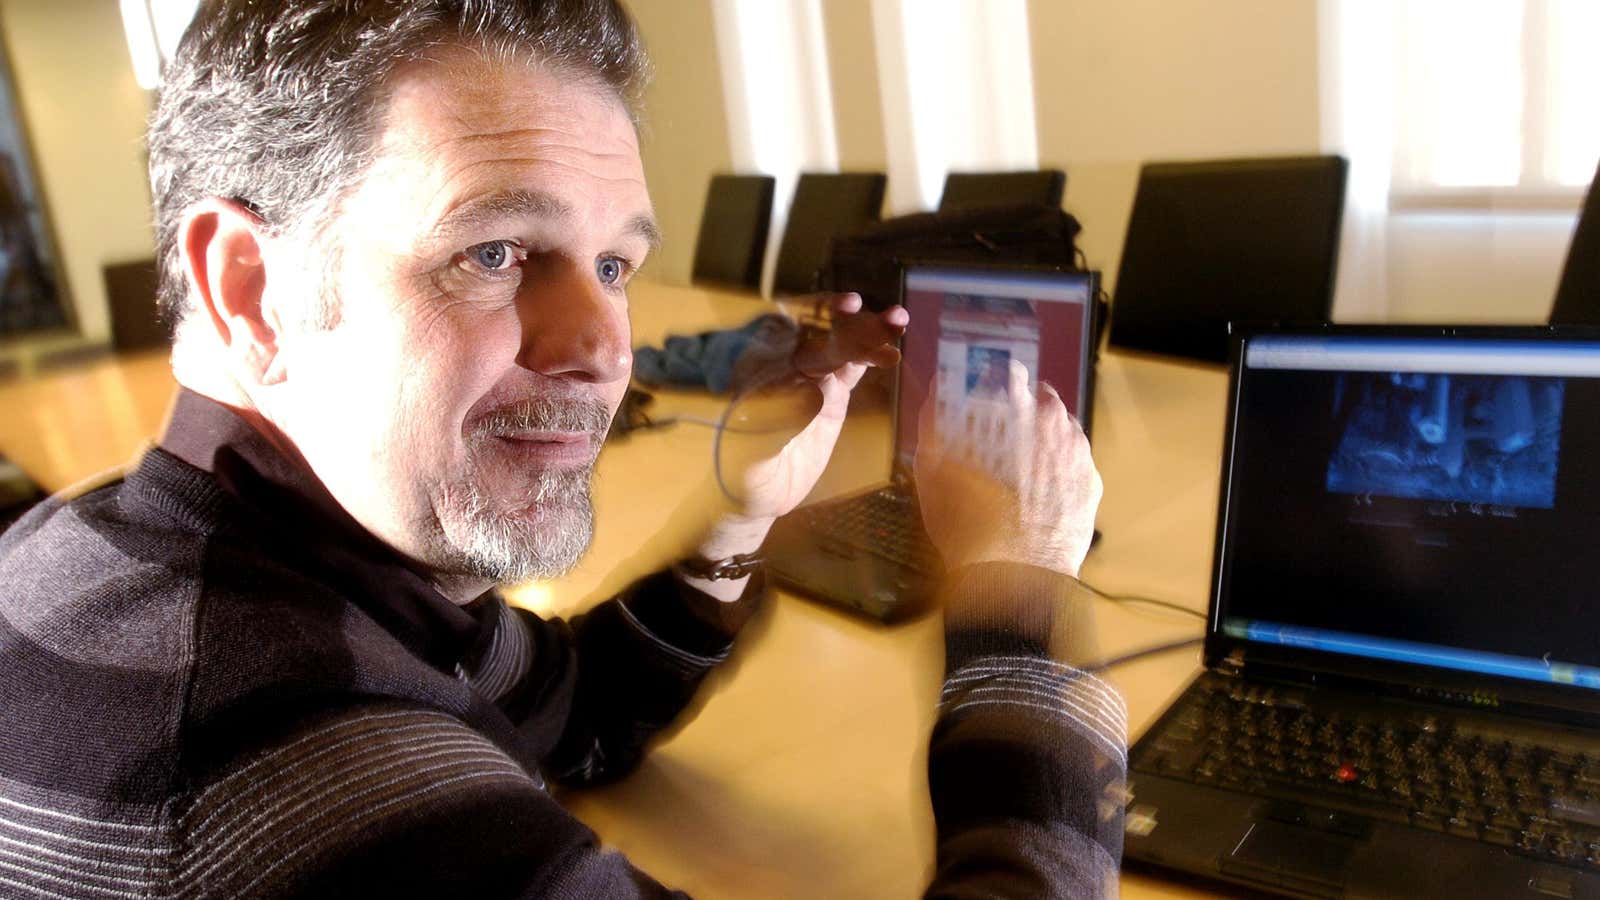 Netflix CEO Reed Hastings demonstrating streaming back in 2007.